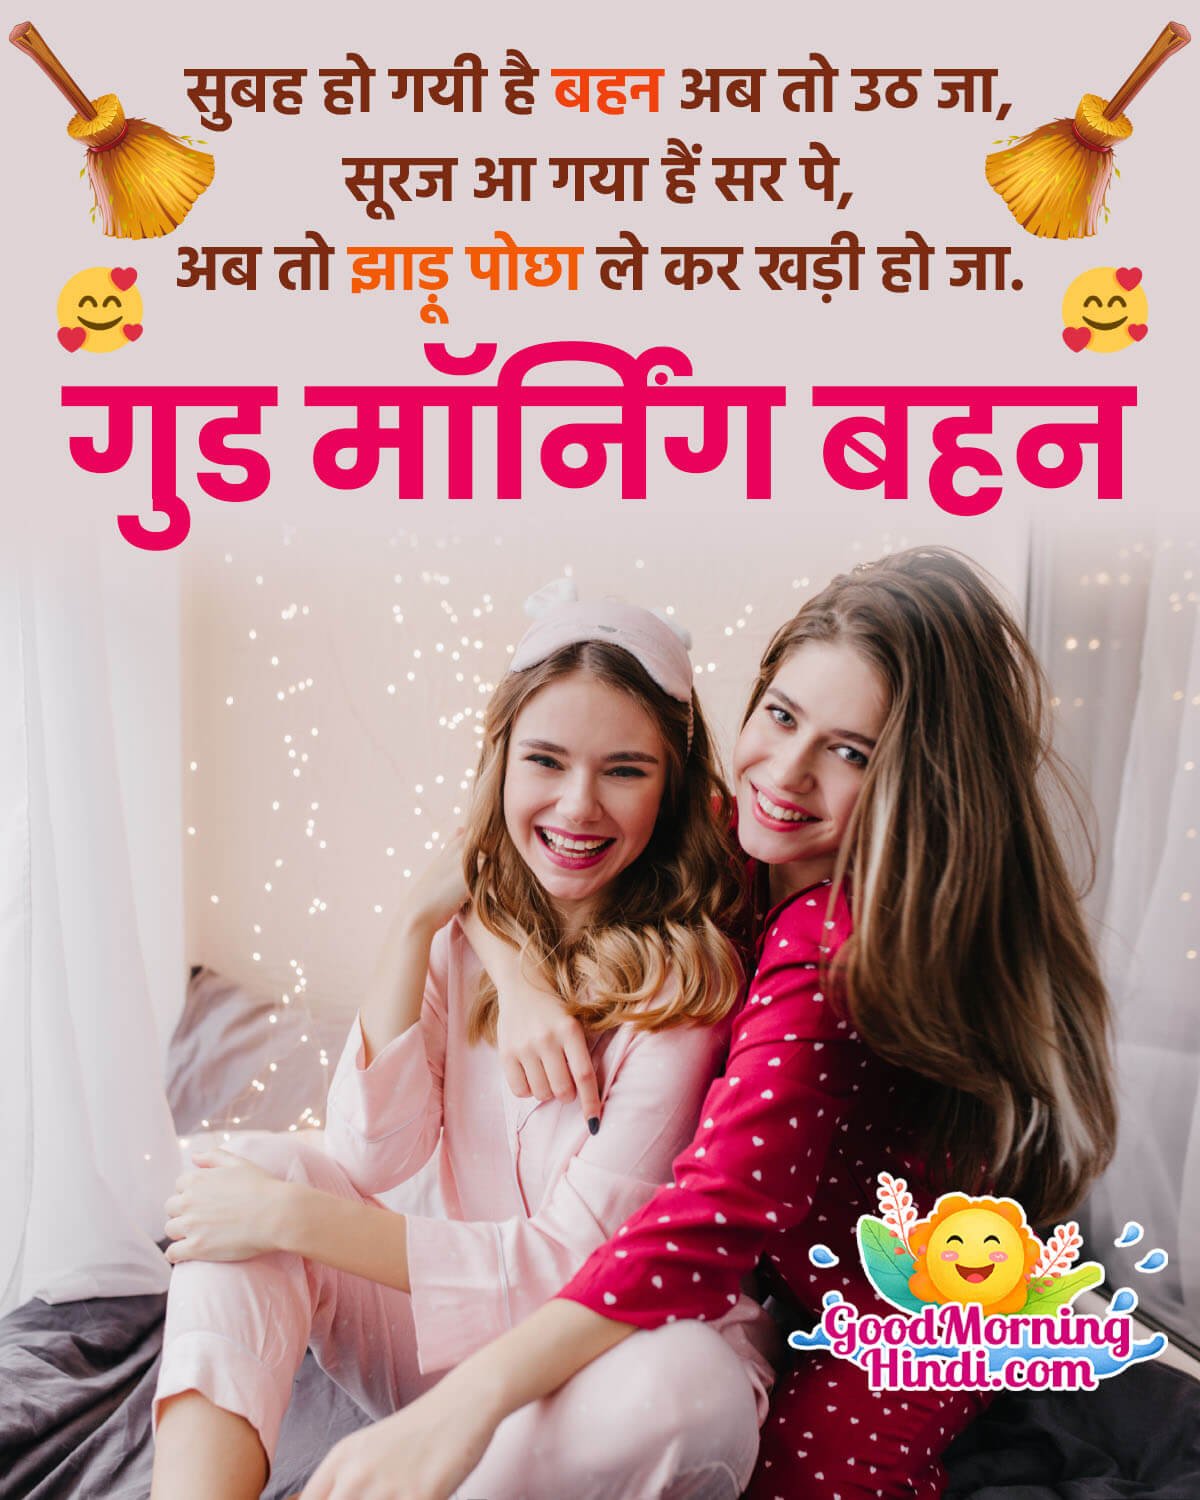 Good Morning Messages For Sister In Hindi - Good Morning Wishes & Images In  Hindi